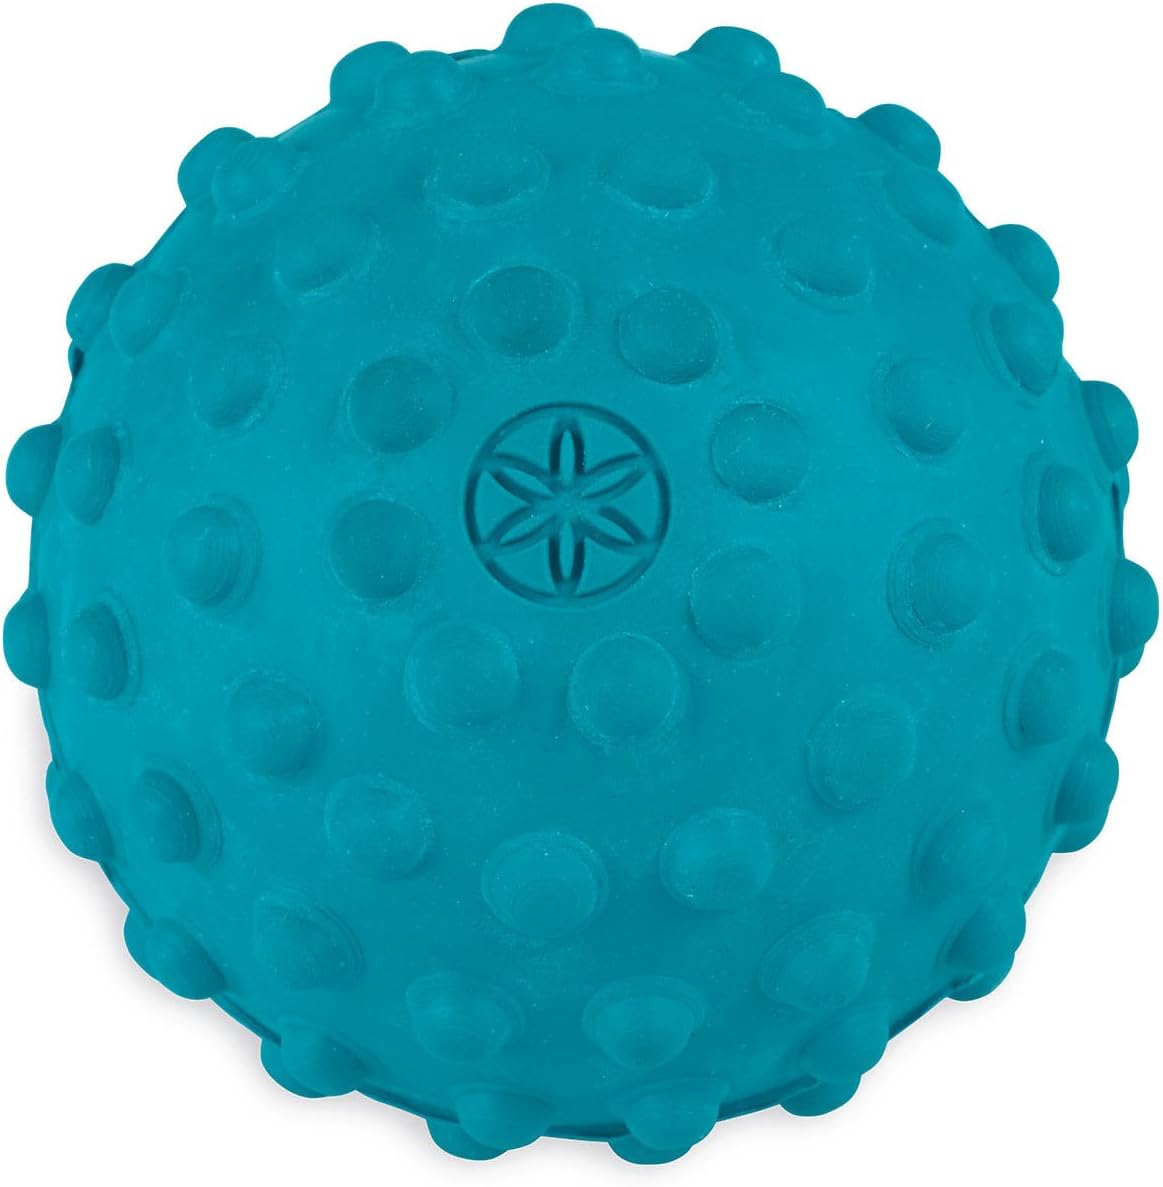 Gaiam Restore Ultimate Foot Massager | Gadgets to Relieve Sore Muscles